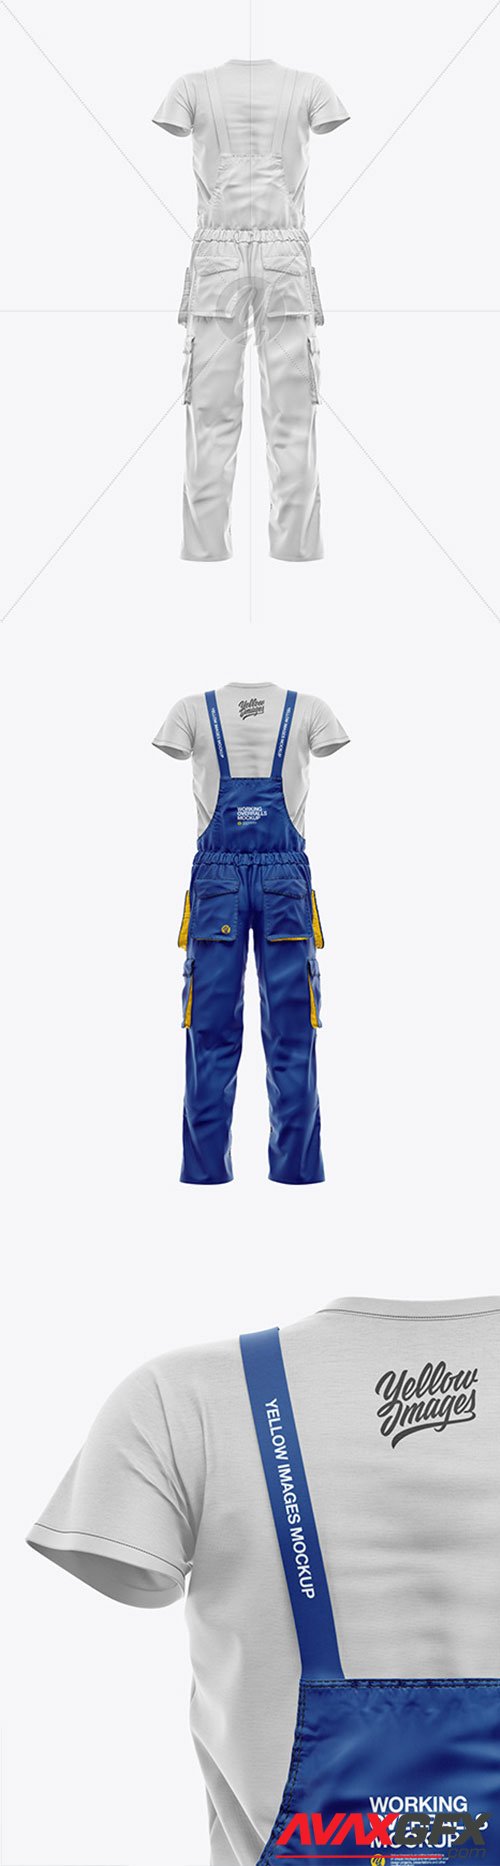 Download Working Overalls Mockup - Front Half Side View 58267 » AVAXGFX - All Downloads that You Need in ...